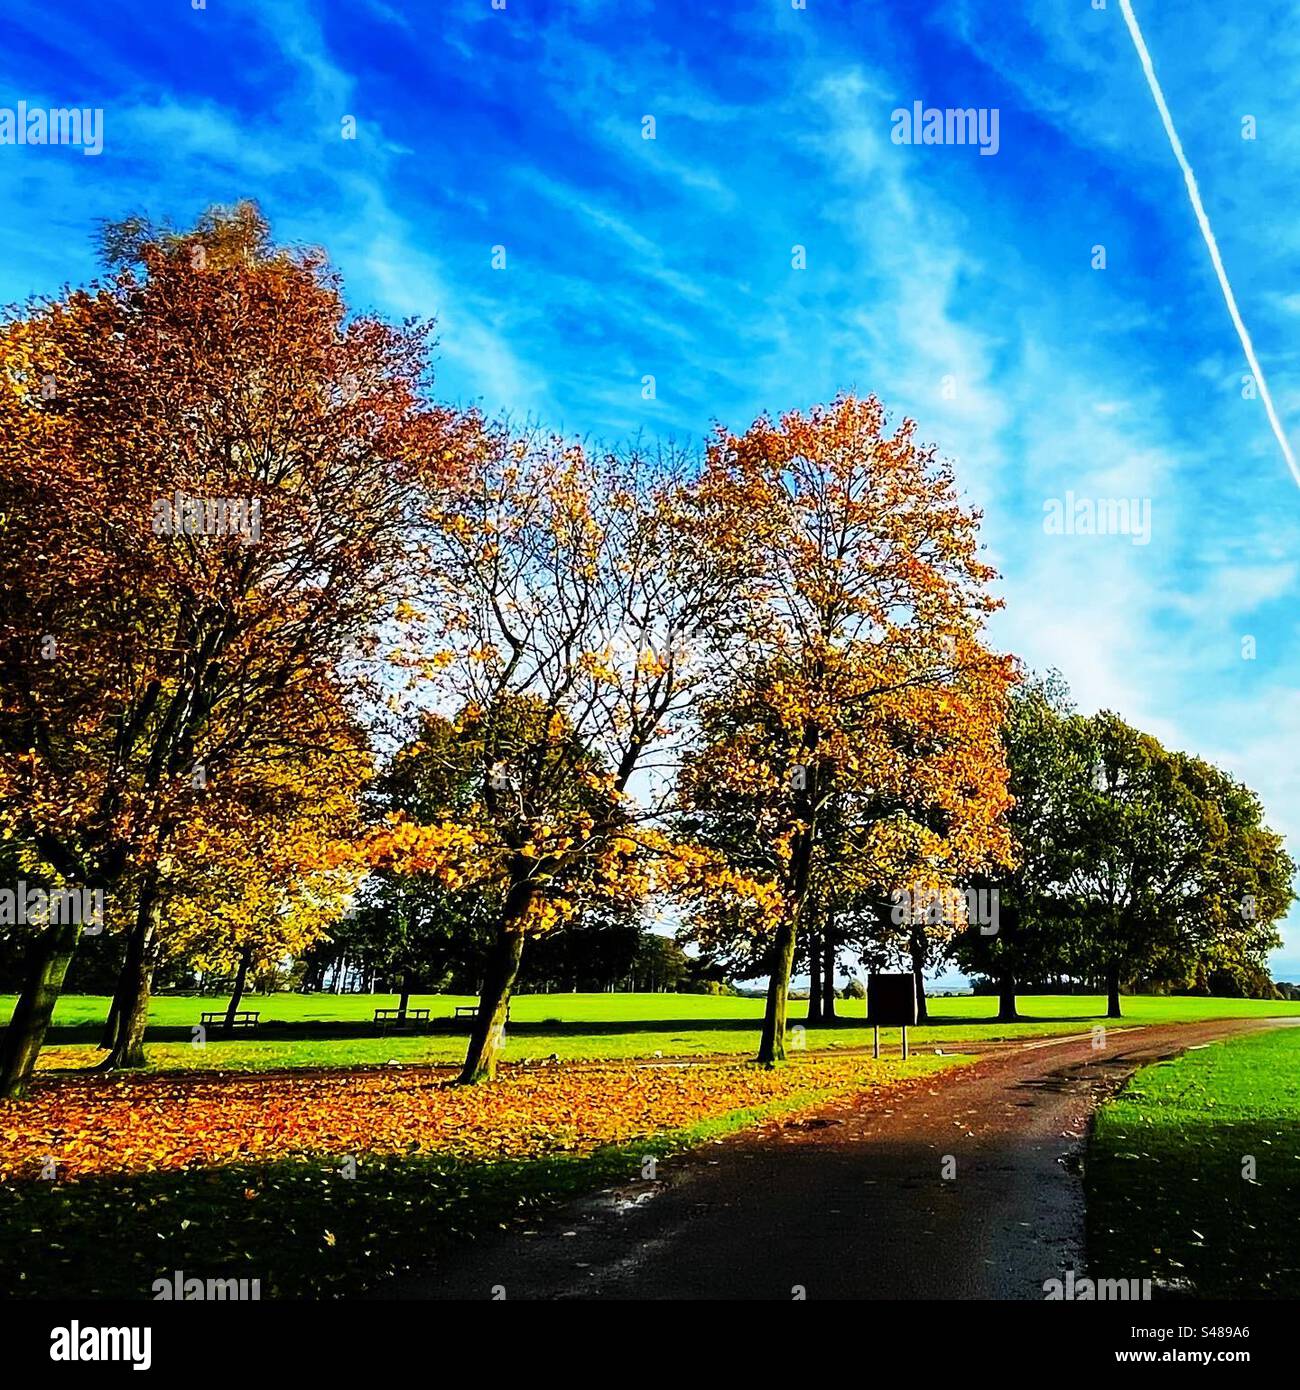 Autumn scene with trees with leaves turning colour and dropping on a blue Sky morning in Tatton Park Knutsford Cheshire Stock Photo